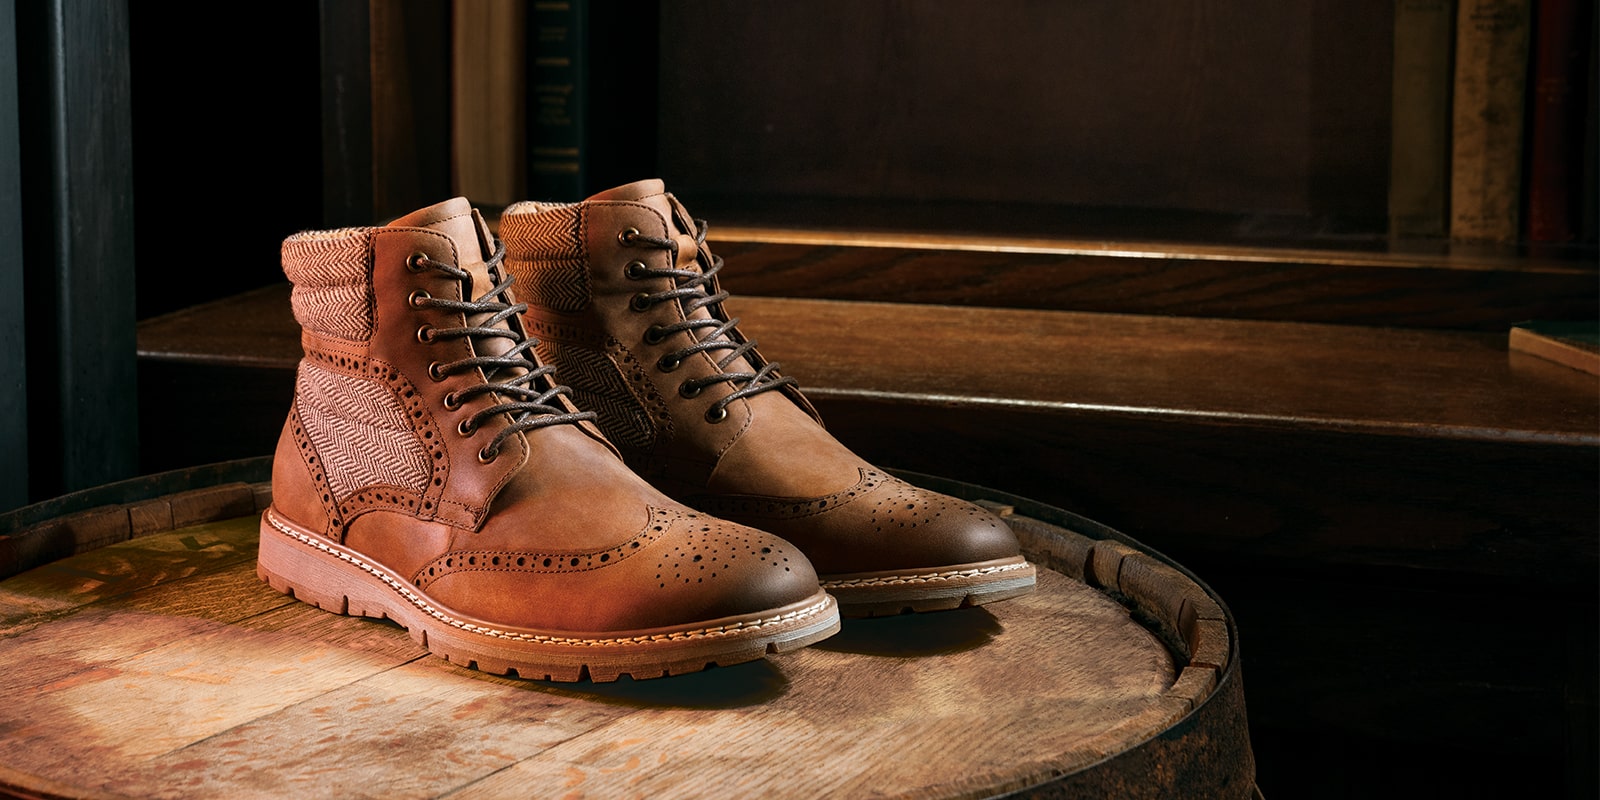 The featured product is the Granger Wingtip Lace Boot in Brown Crazy Horse.